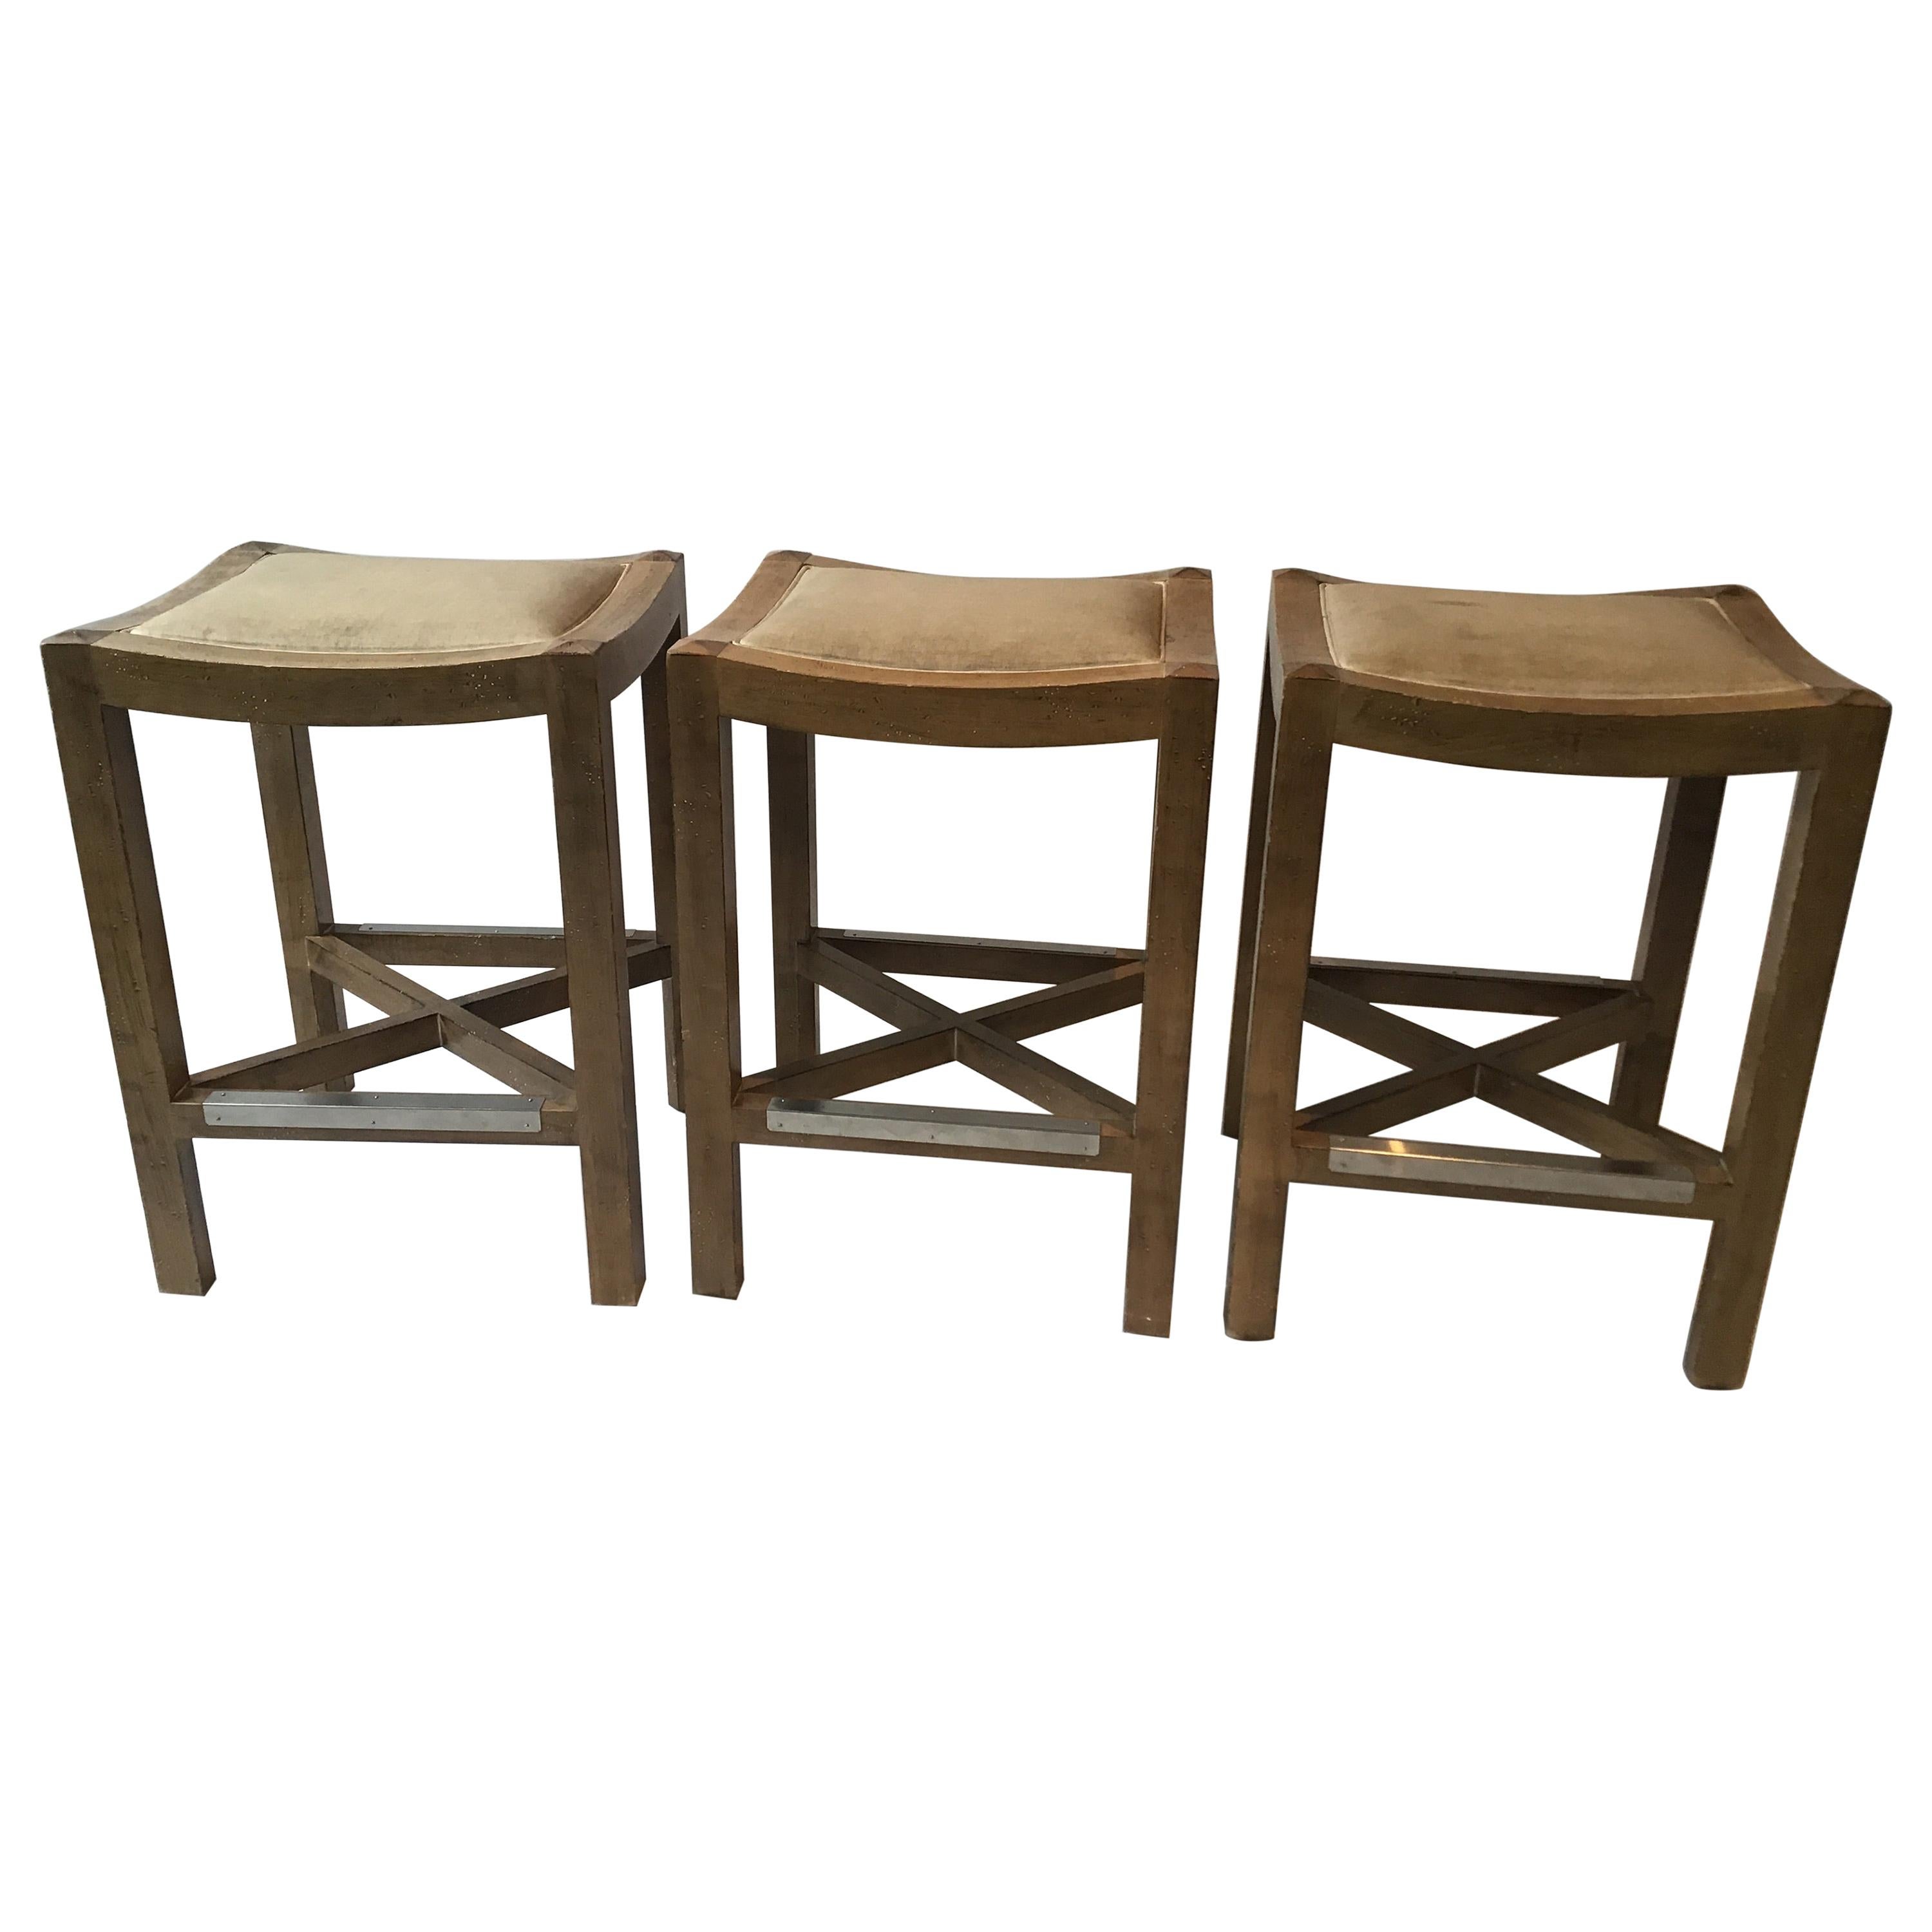 3 Wood Counter Stools by Lee Industries